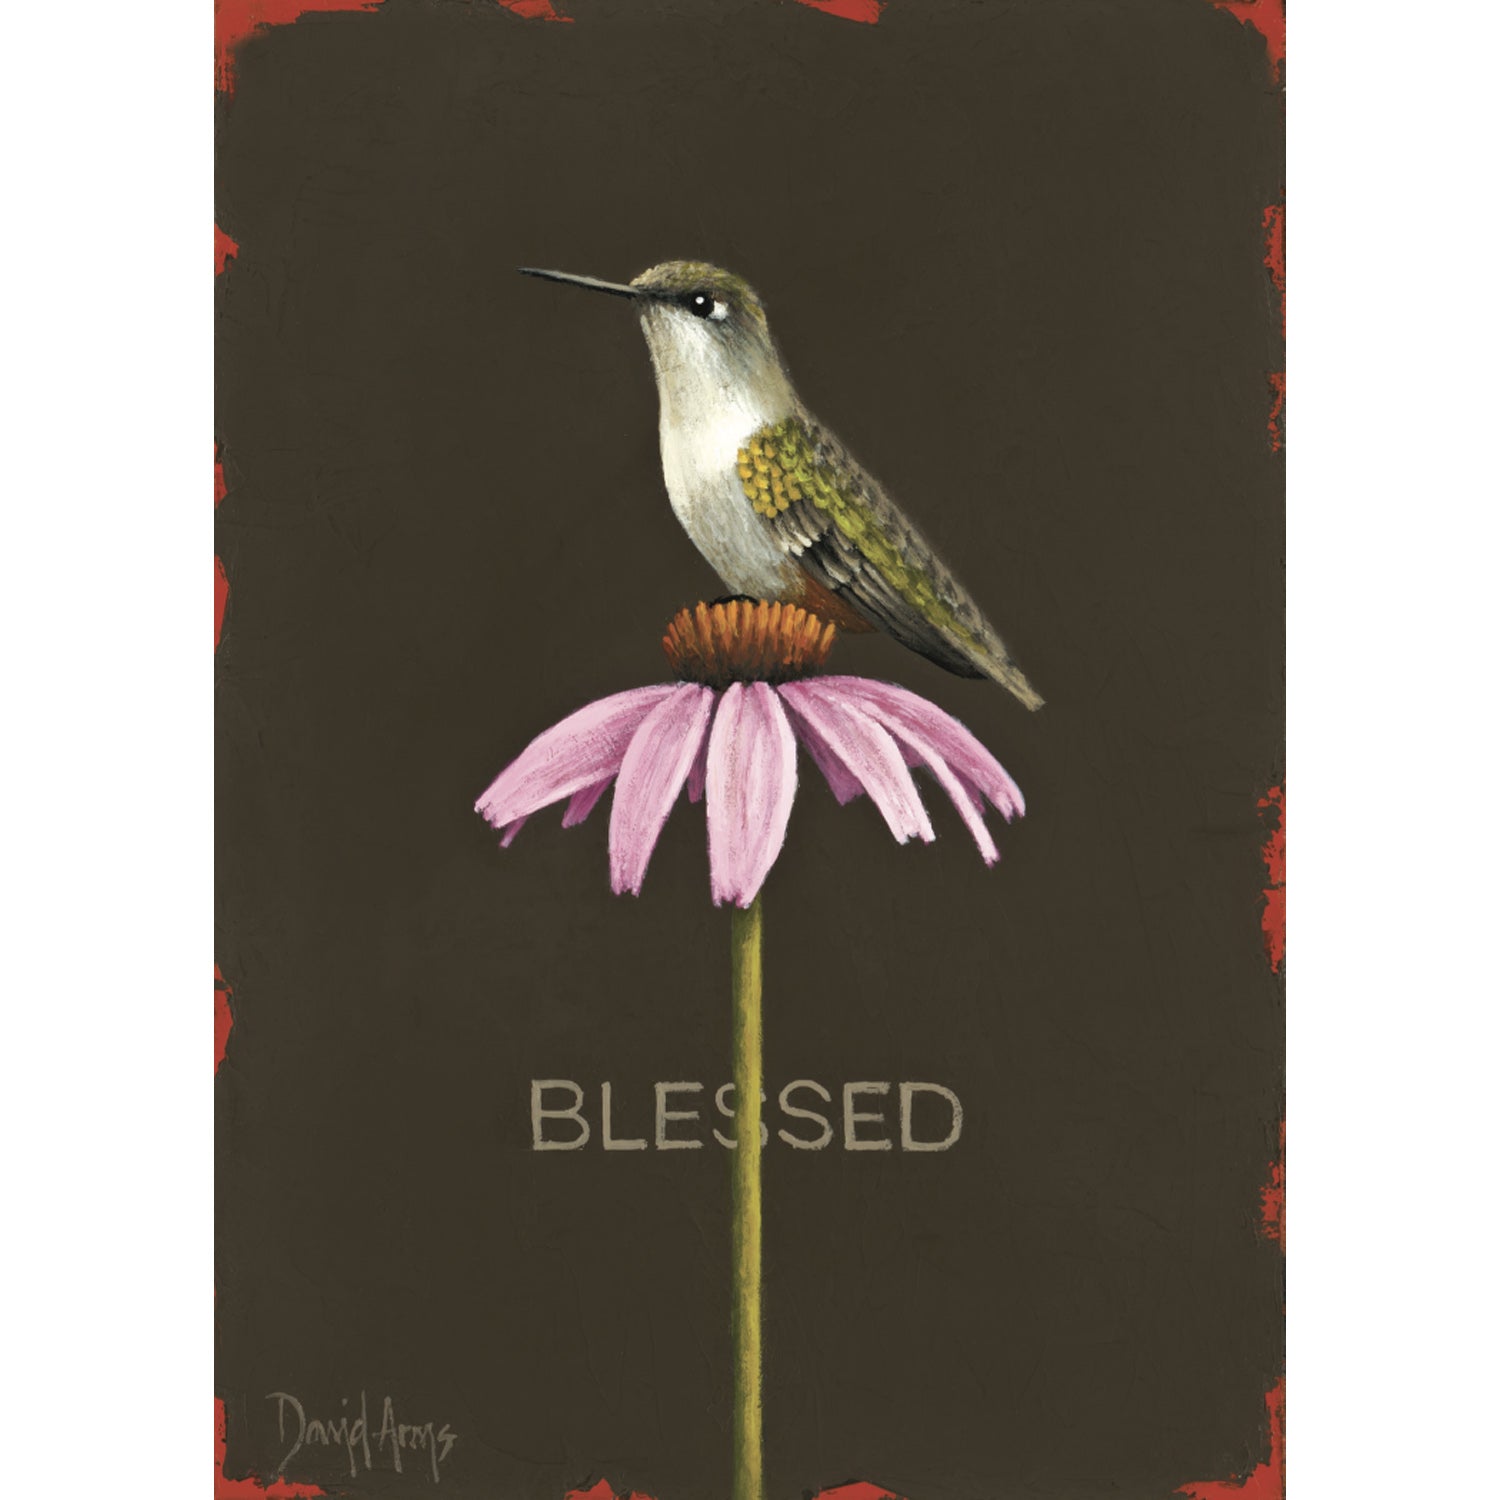 A Blessed Card featuring a hummingbird sitting on a flower, measuring 5&quot; x 7&quot;, by David Arms, by Hester &amp; Cook.